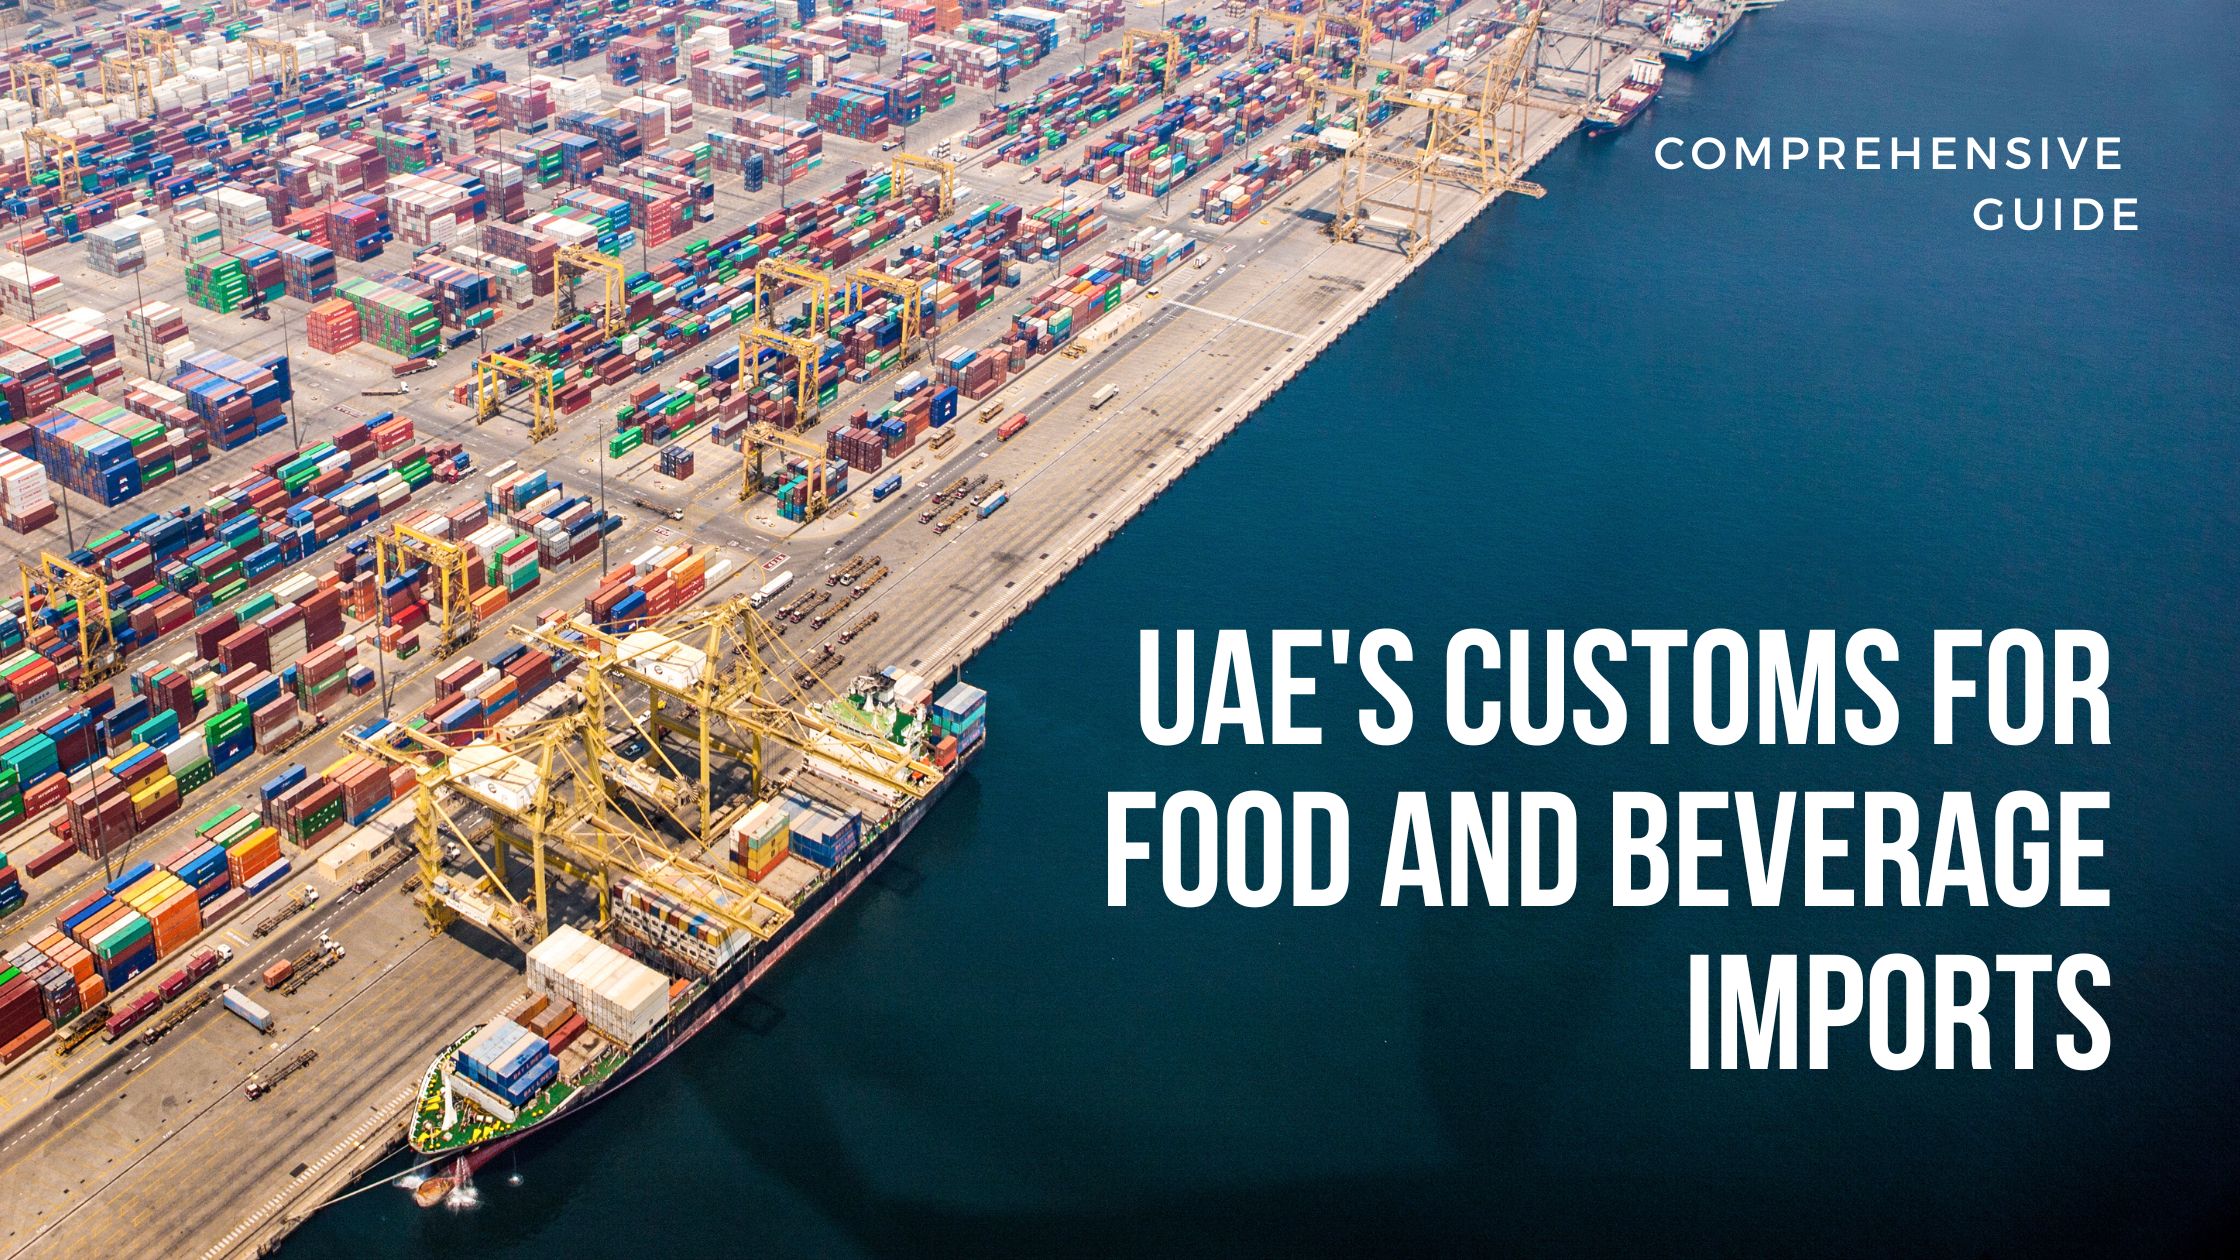 UAE's Customs for Food and Beverage Imports By Vervo Middle East for Customs Clearance Services in the UAE